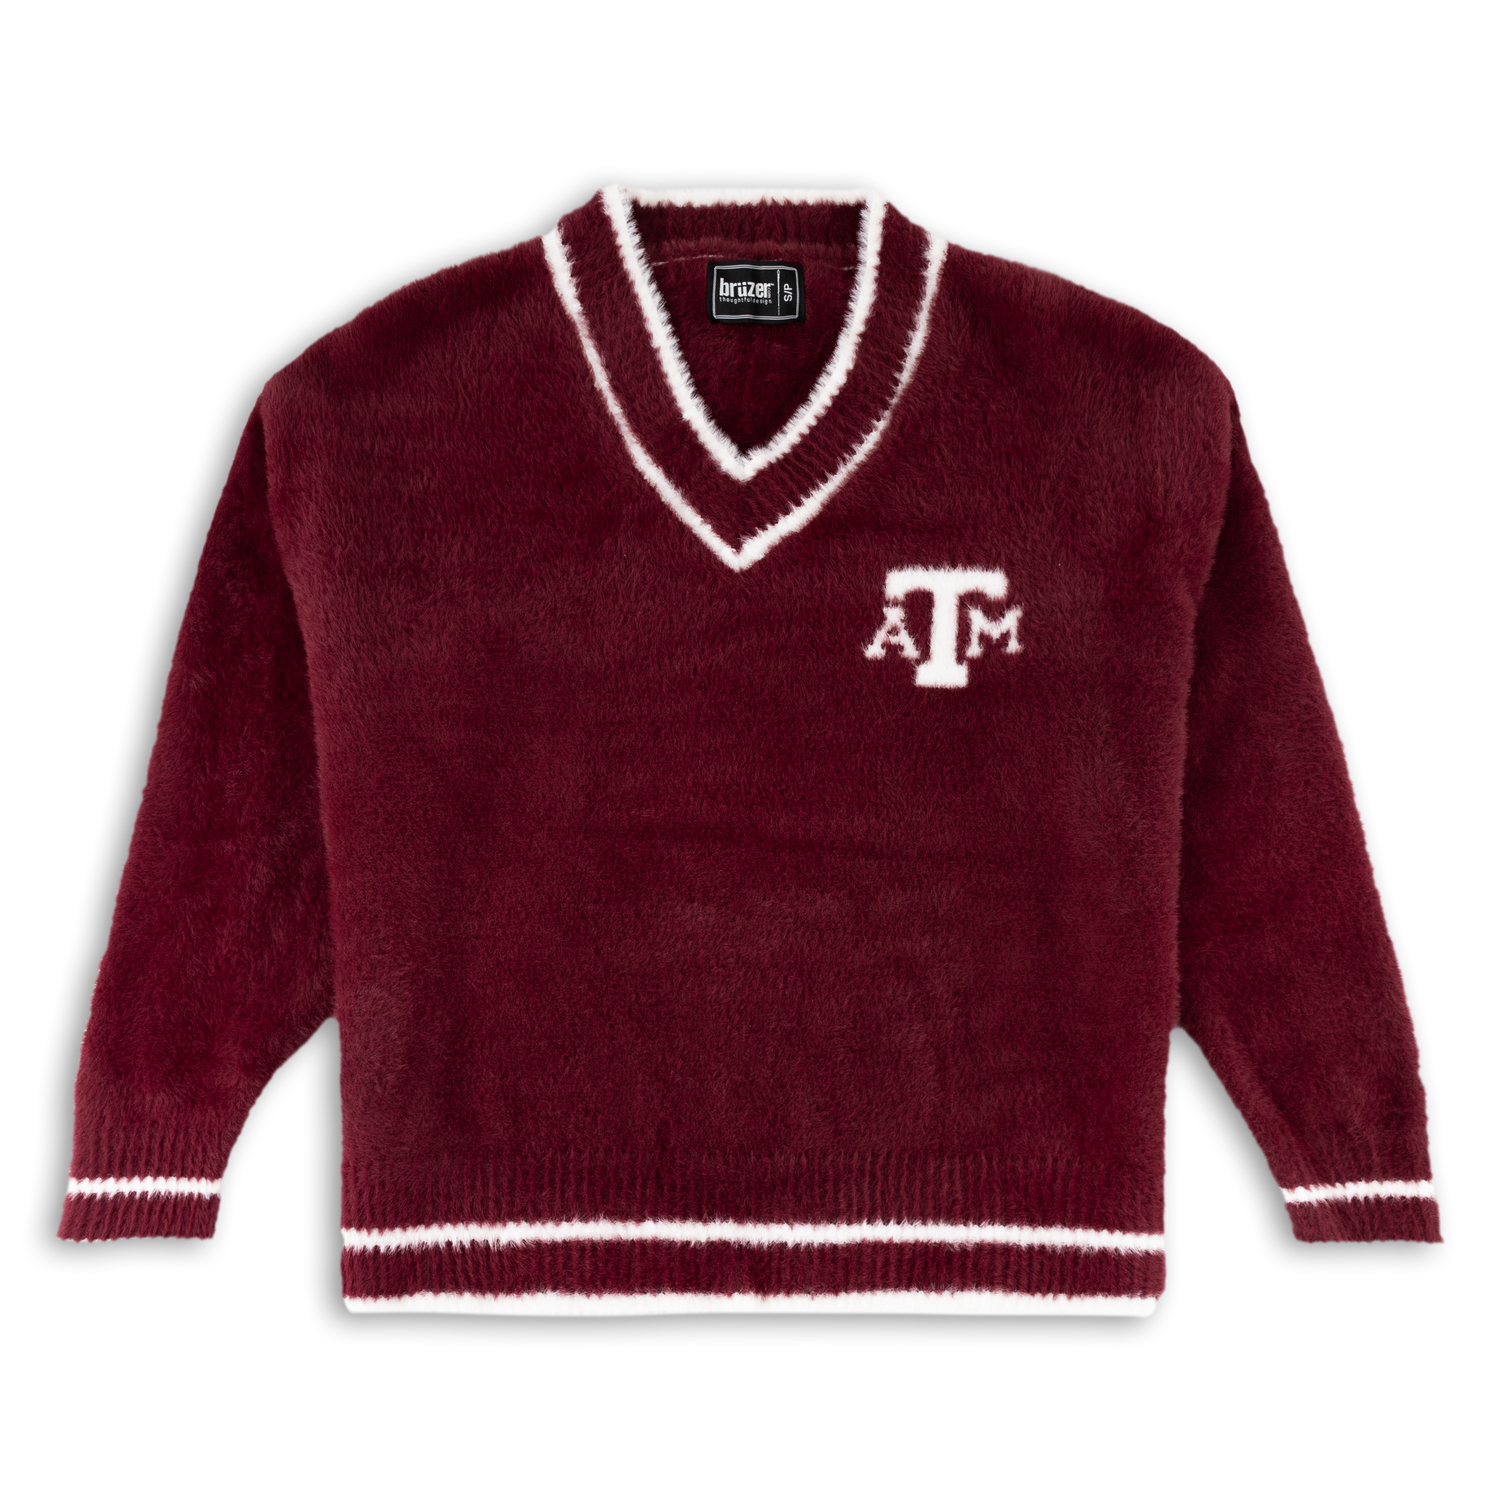 Texas A&M Her Intarsia V Neck Sweater